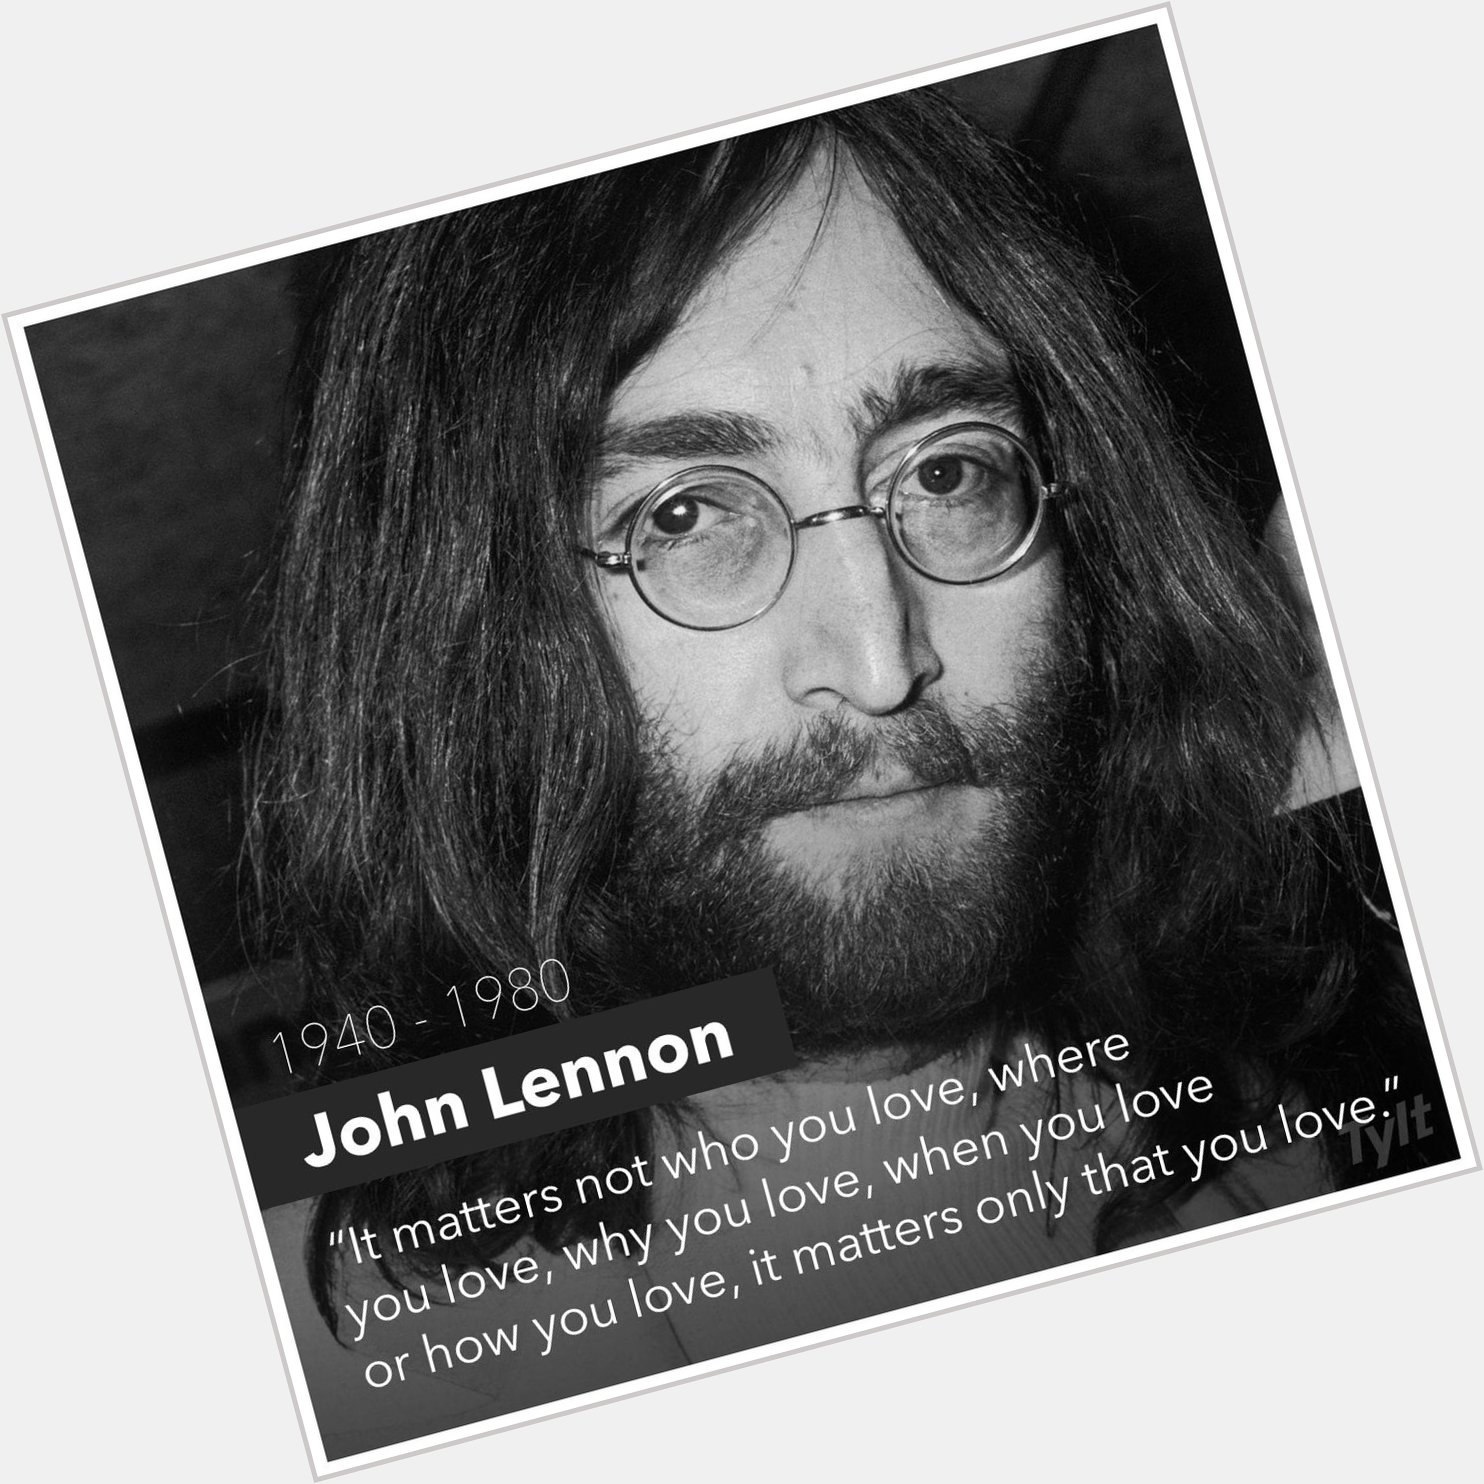 Happy Birthday, John Lennon! There\s never a day where we don\t miss you! Rest in Peace!  